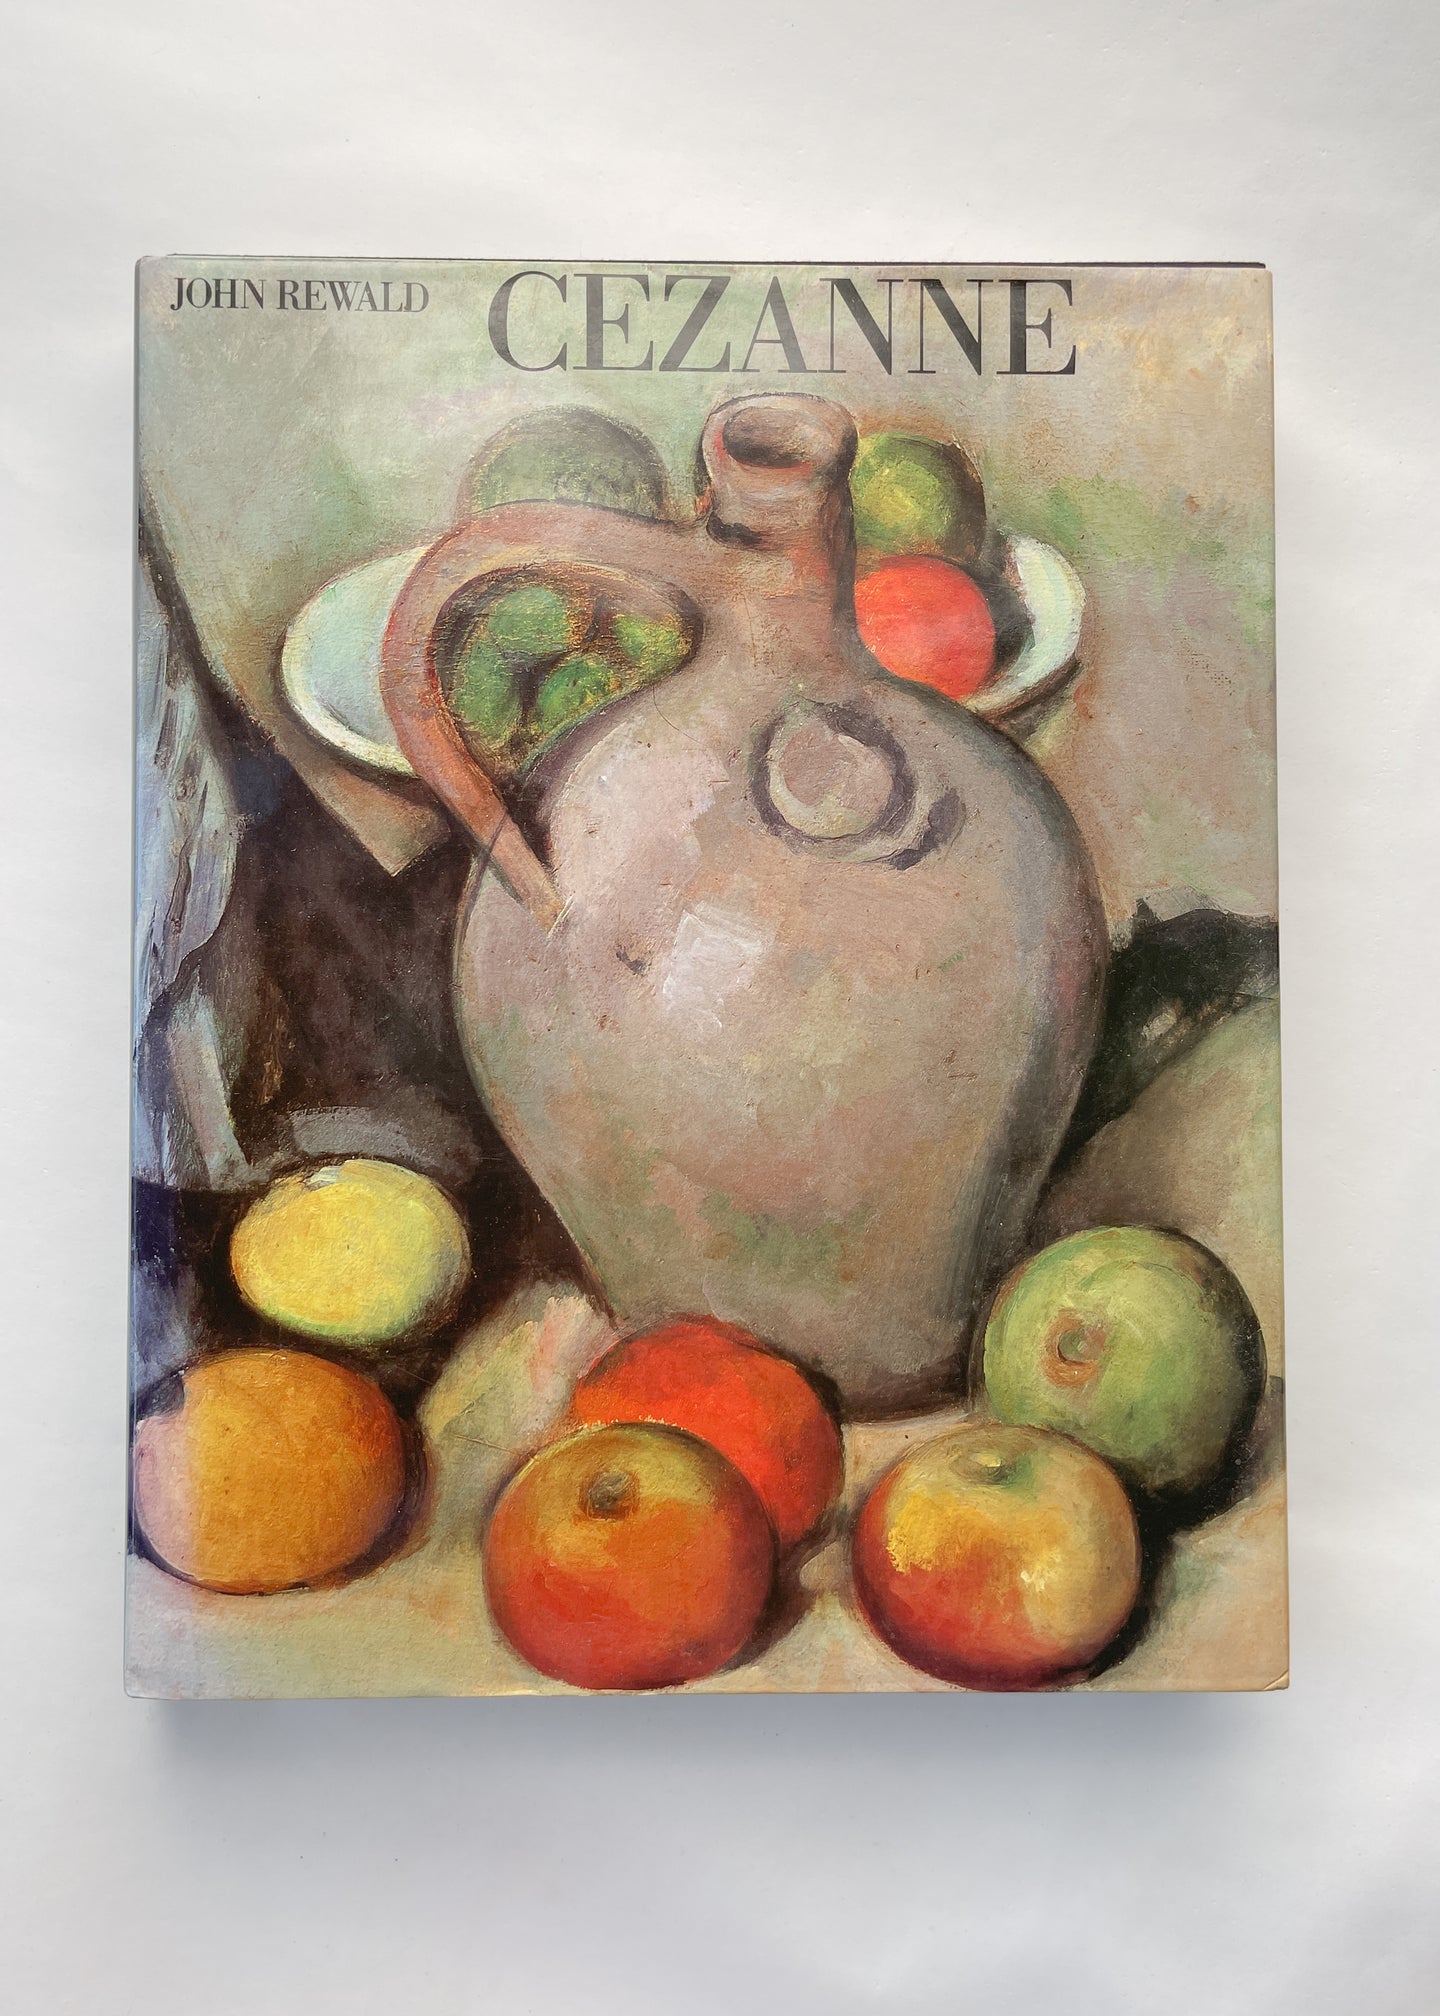 Extra Large Vintage Cezanne Art Coffee Table Book